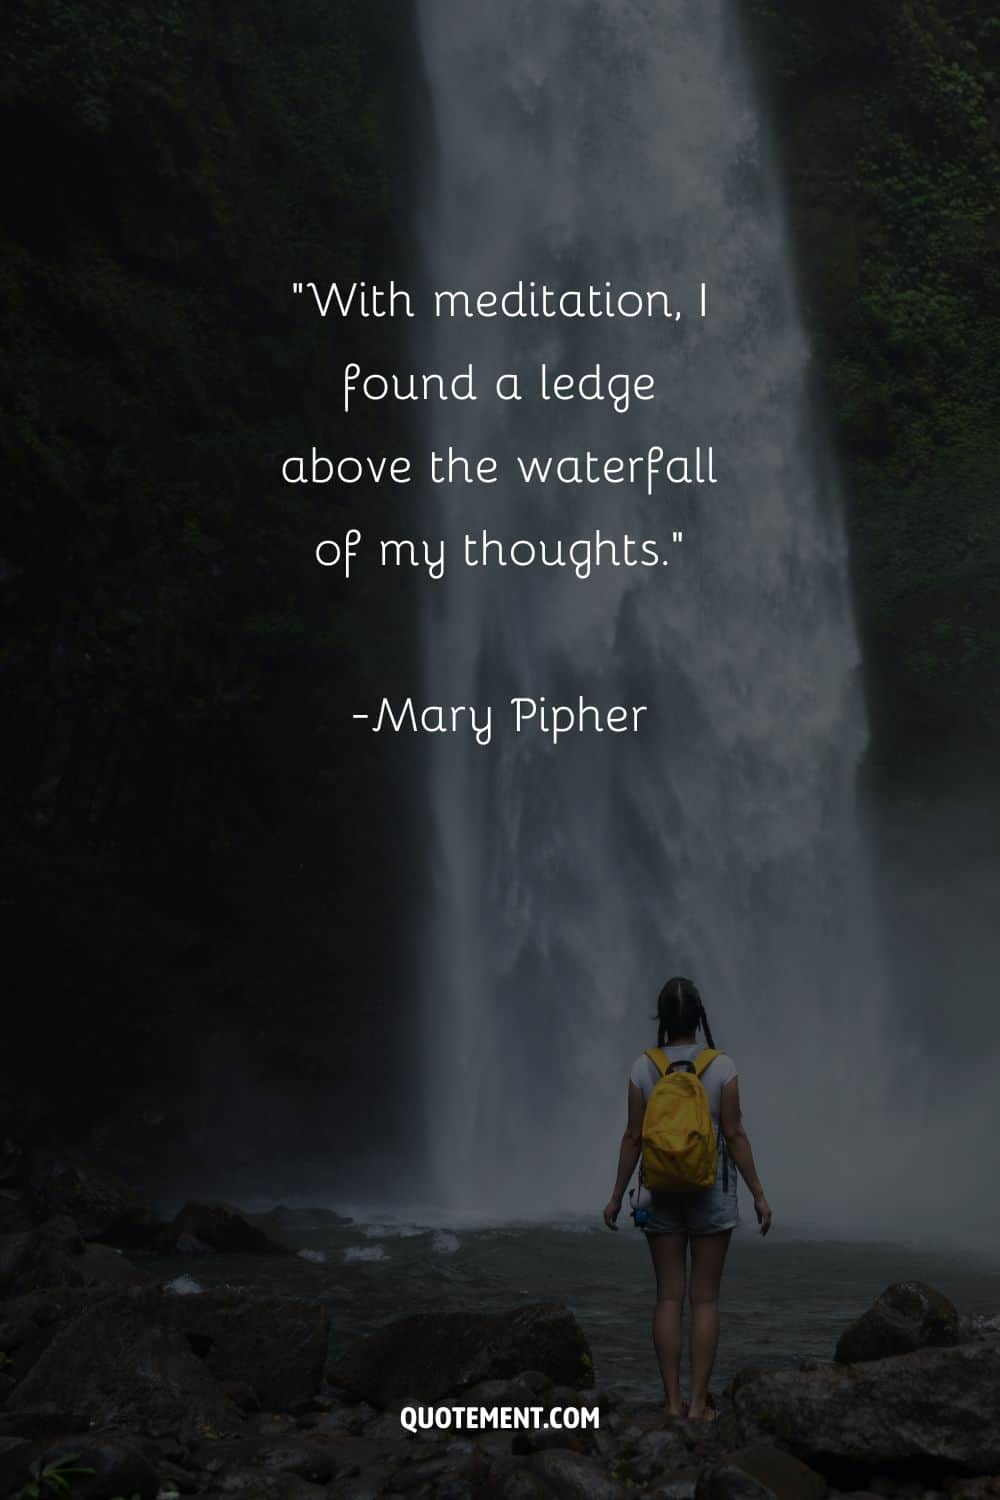 Amazing quote by Mary Pipher and a woman by the waterfall in the background
